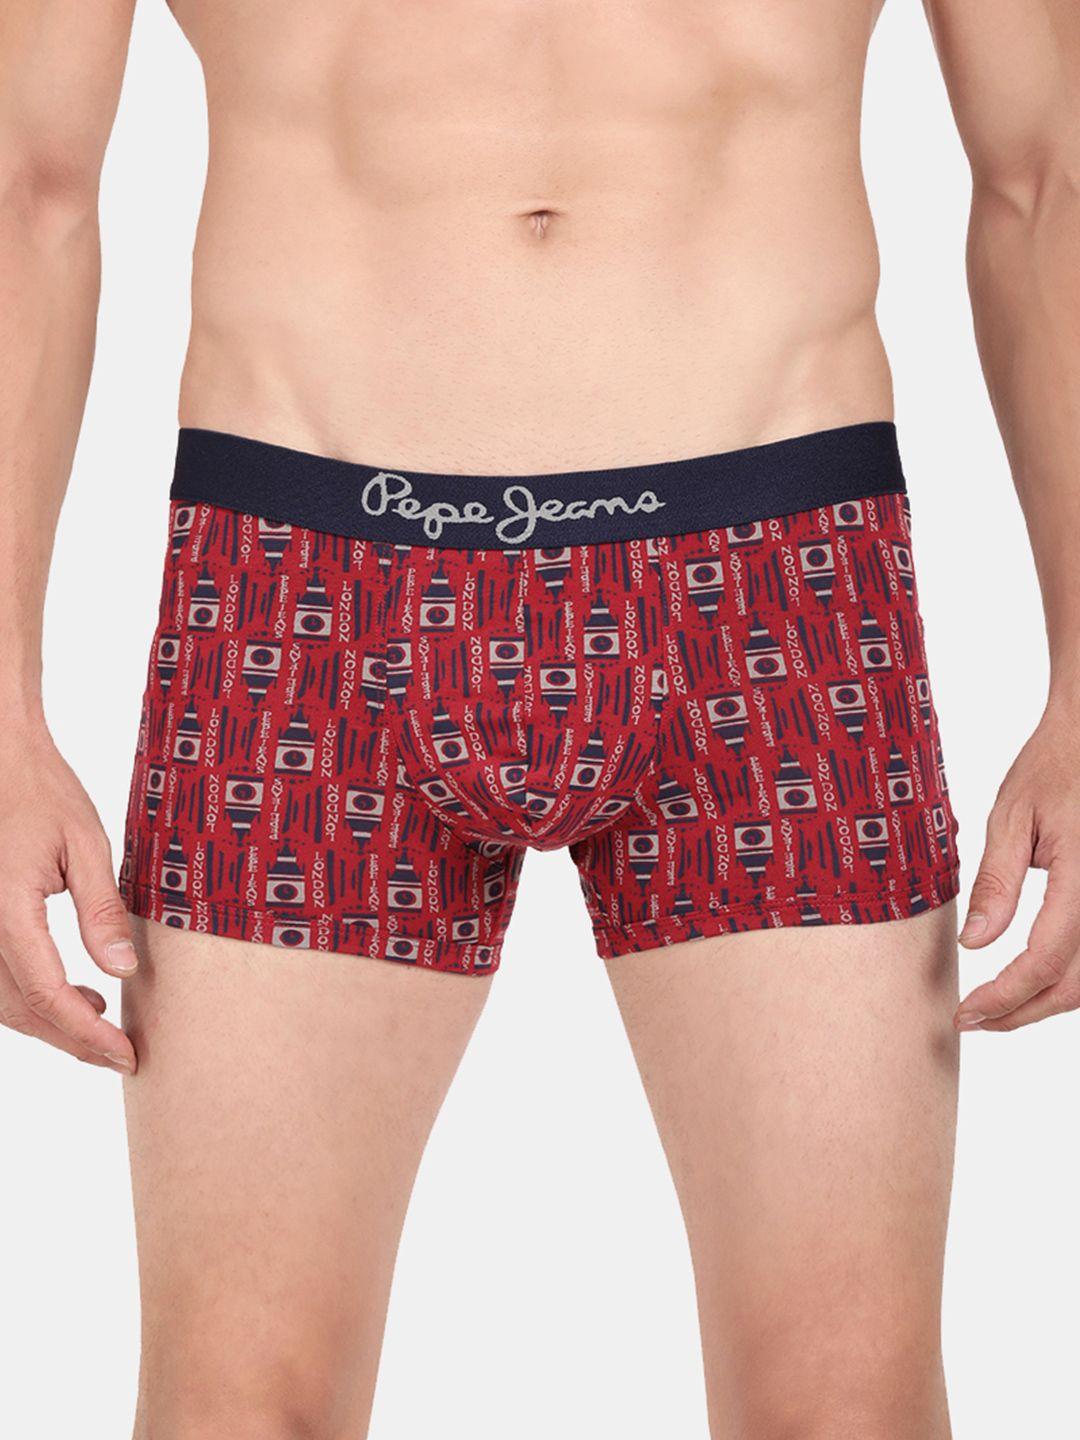 pepe jeans men red & navy blue printed cotton trunk clt05-parry red aop-s